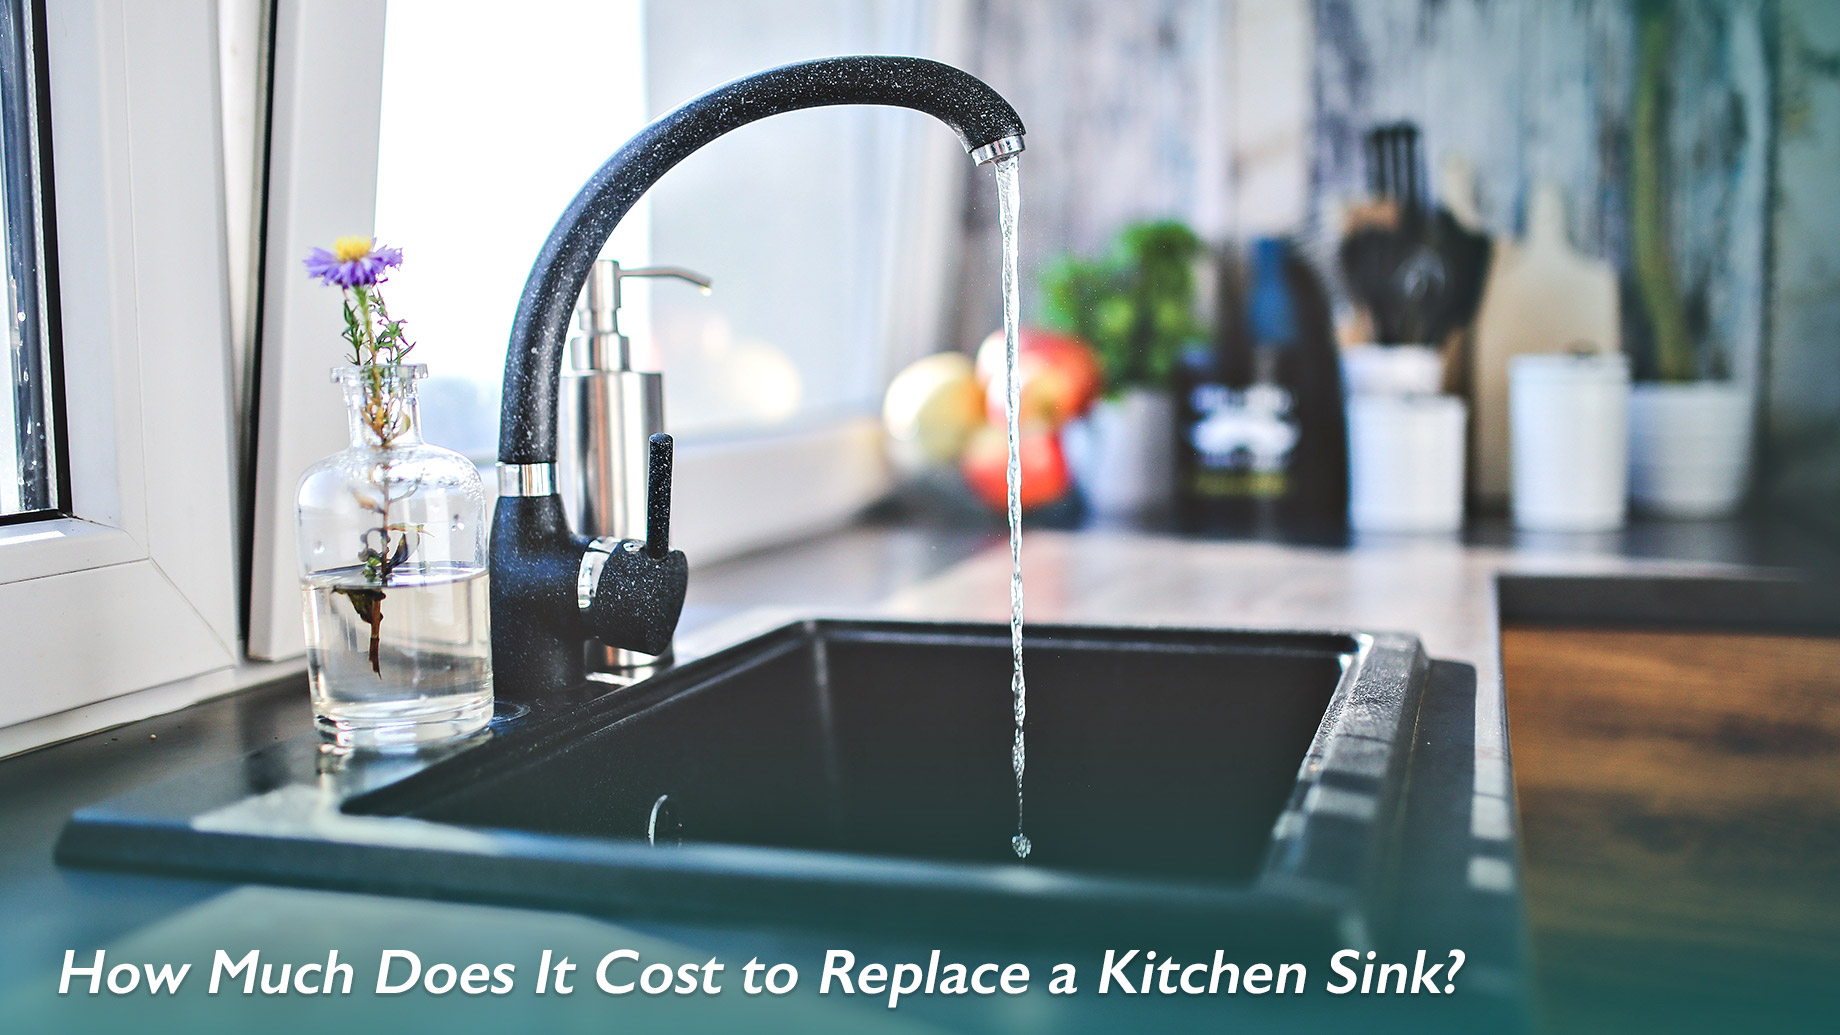 Cost To Replace A Kitchen Sink, How Much Money Does It Cost To Replace A Kitchen Sink